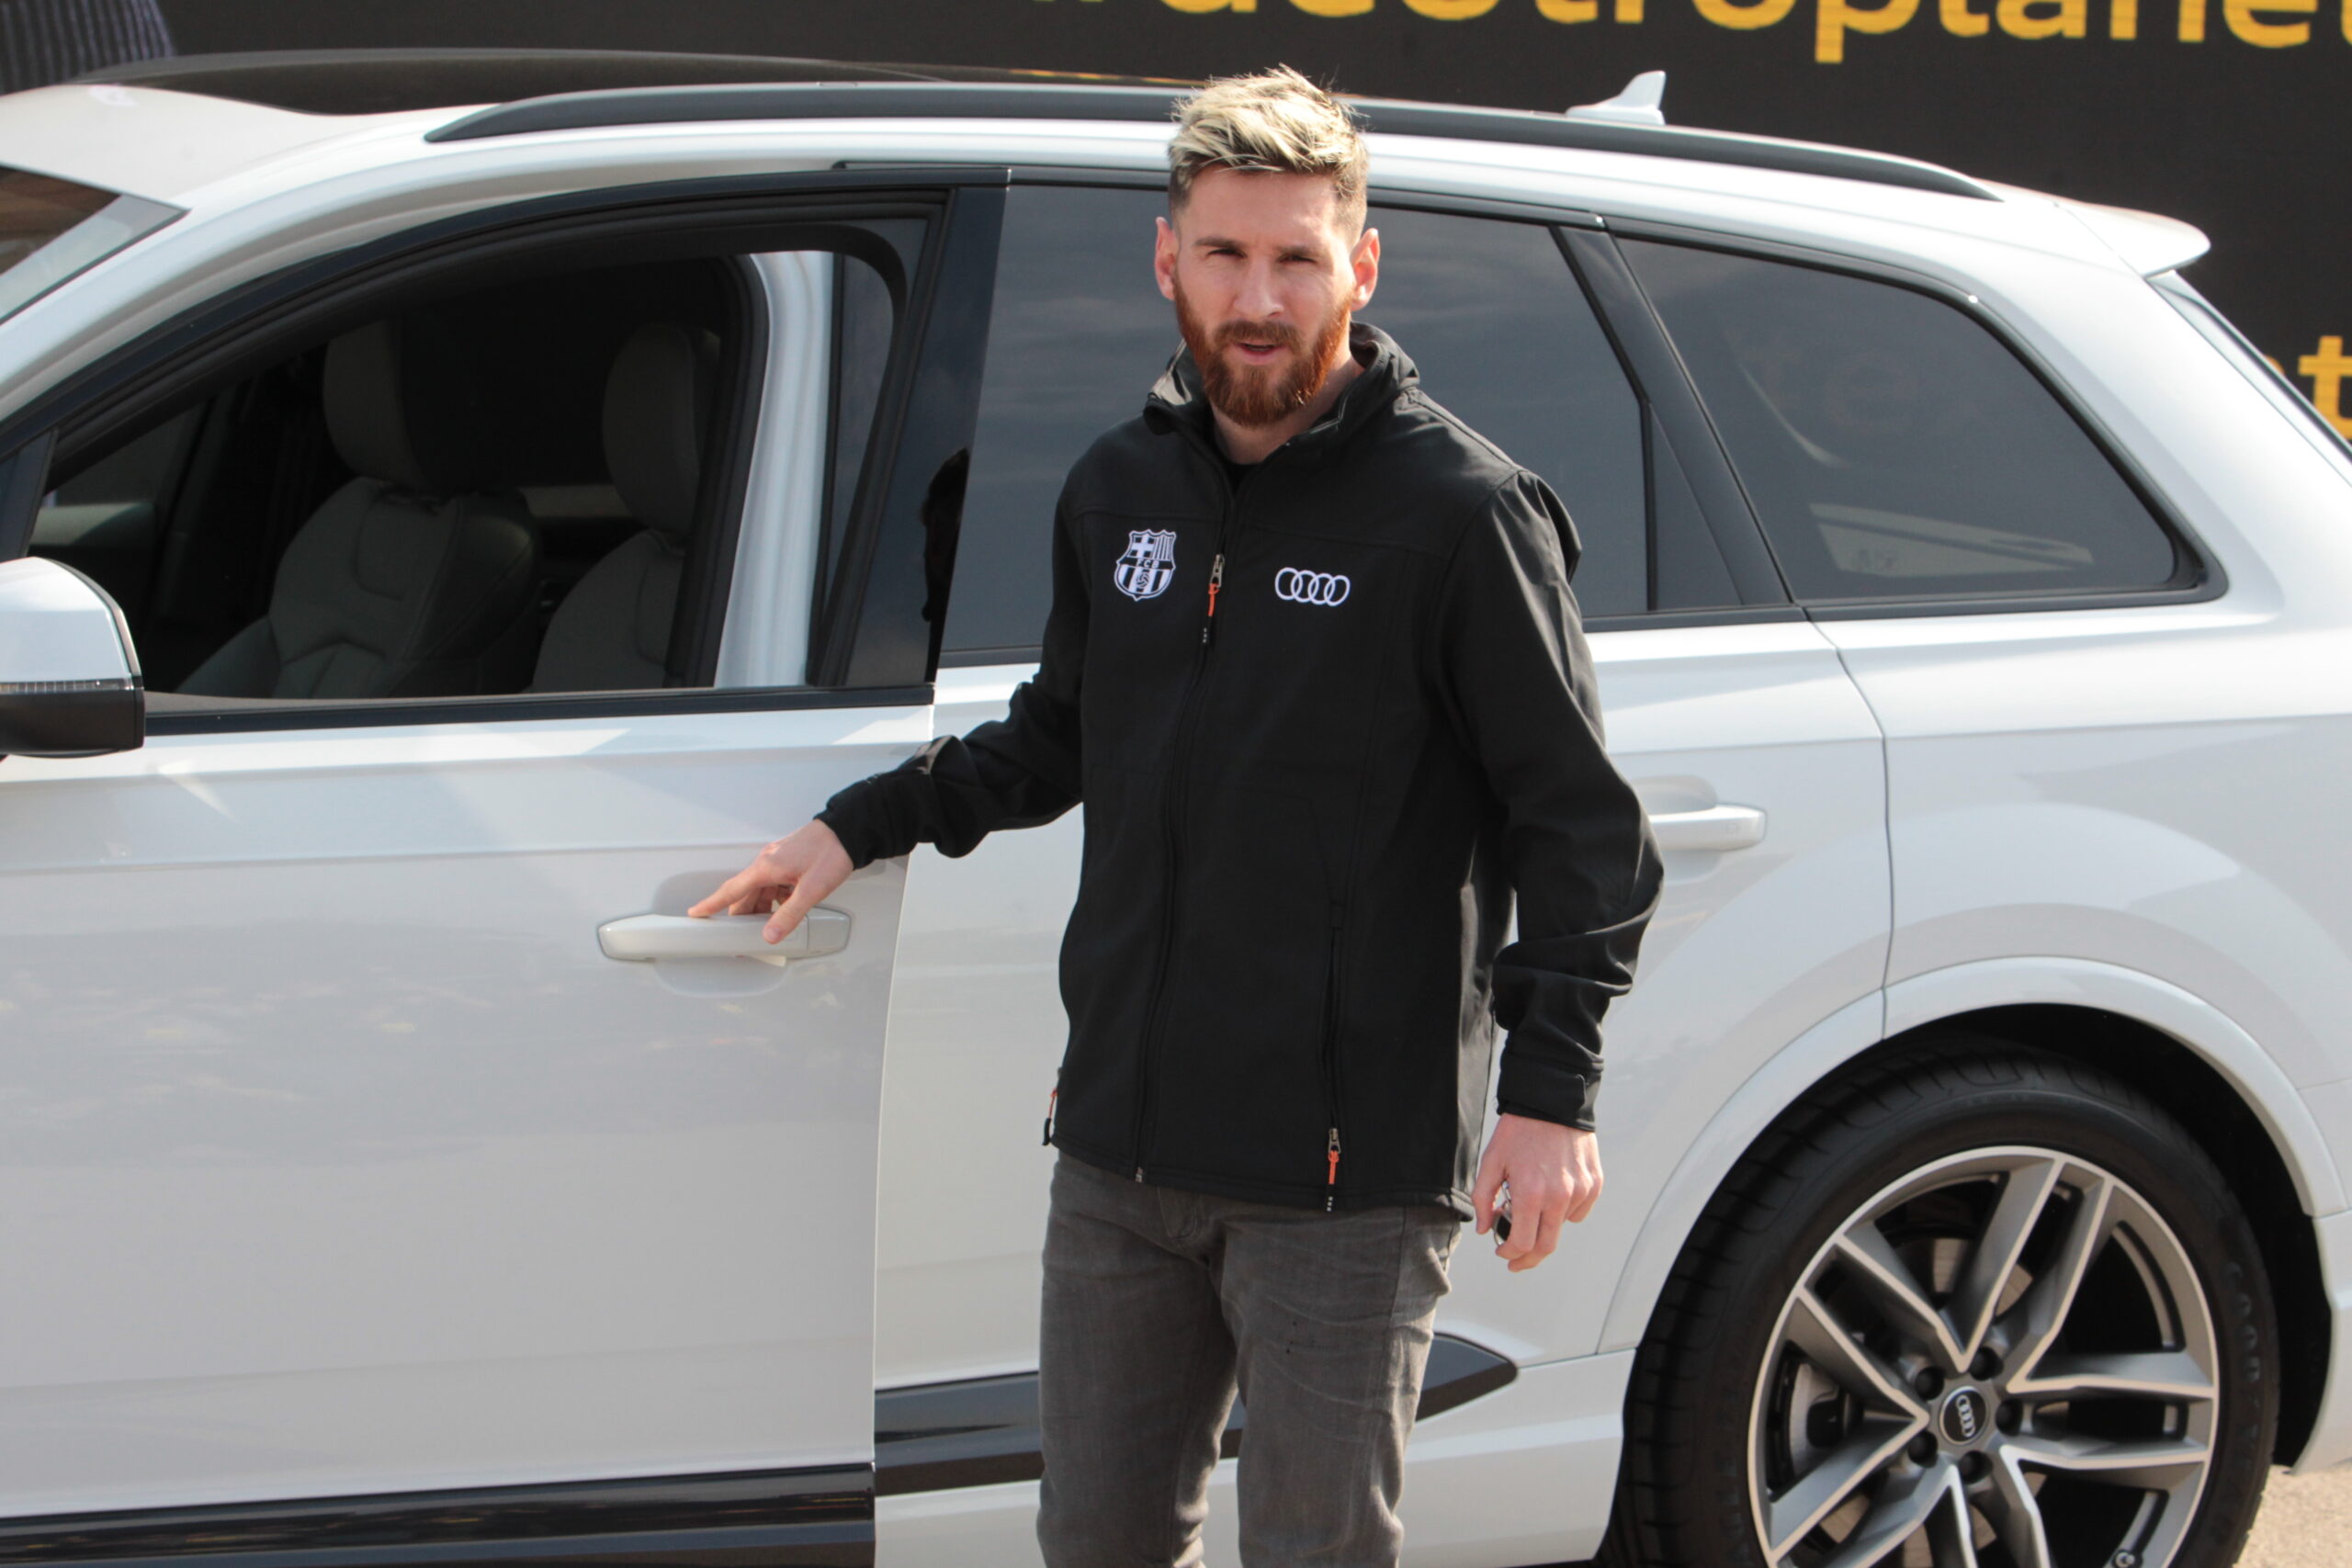 Messi boasts a car collection reportedly worth £3million